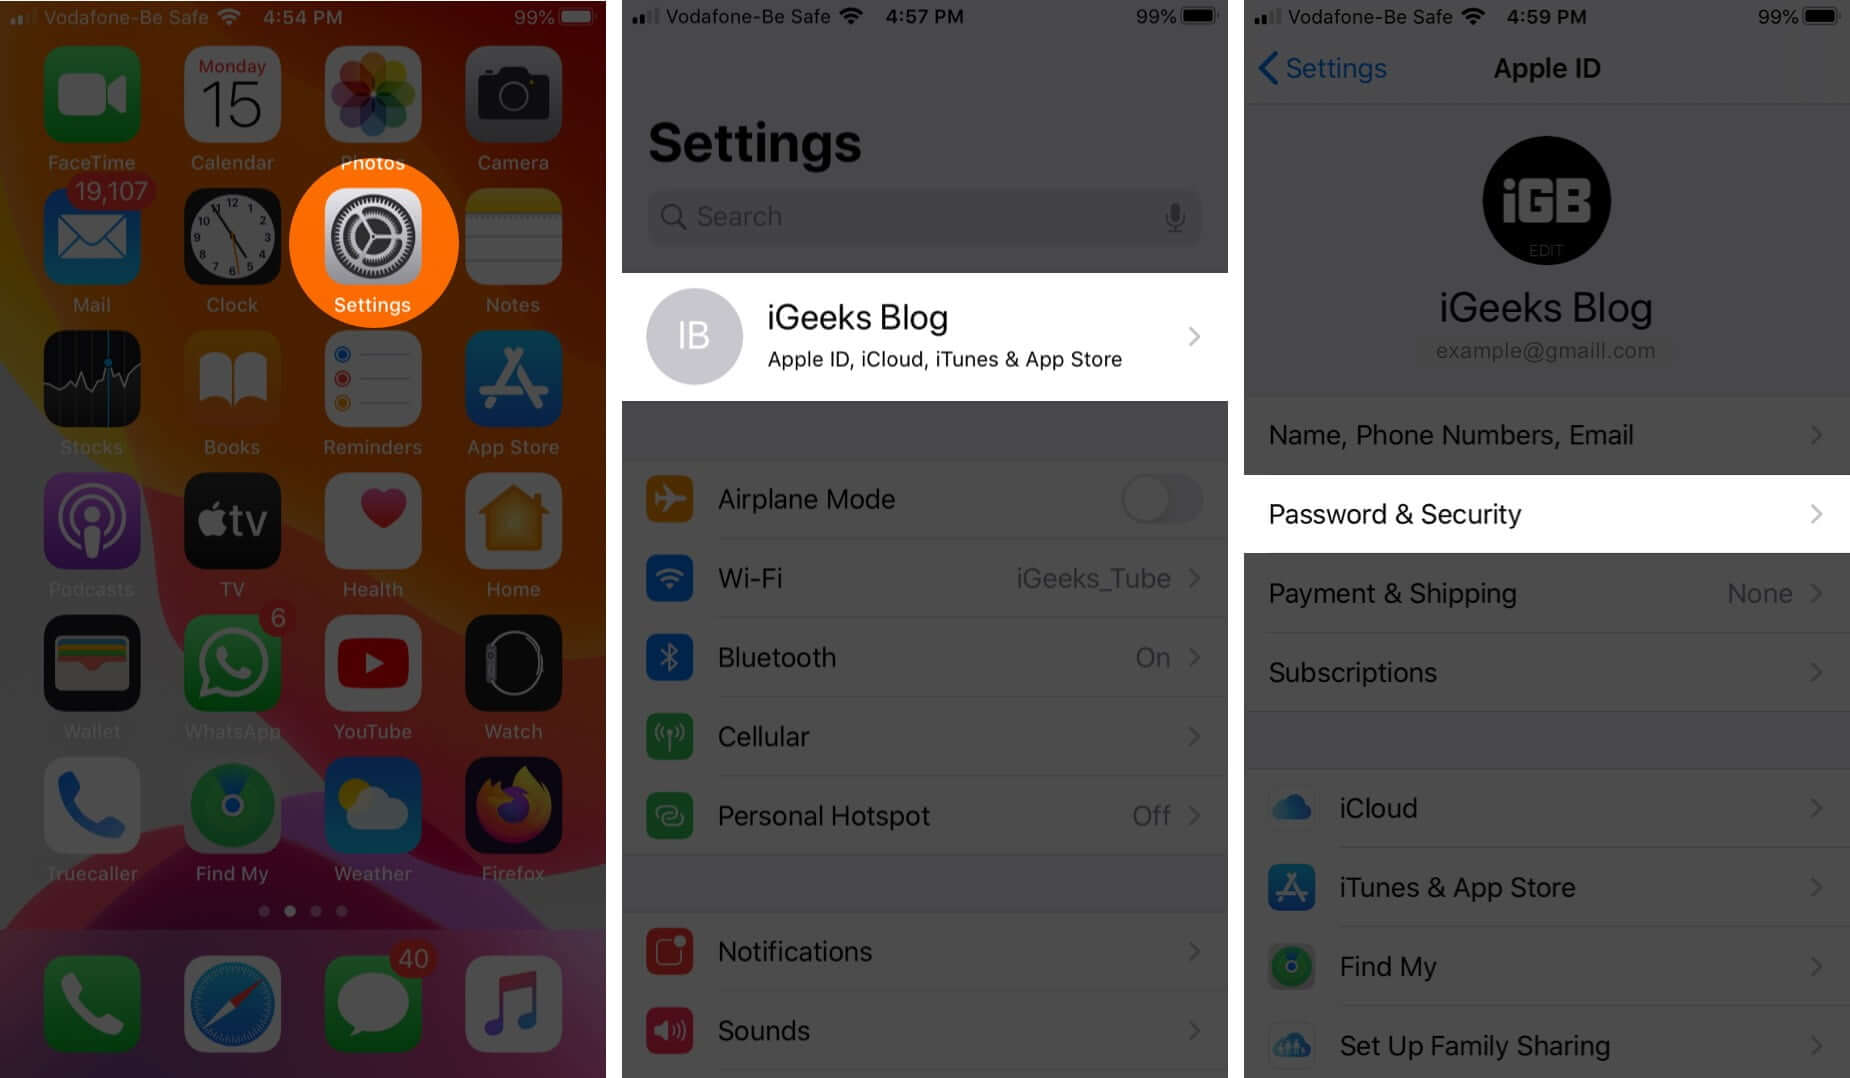 open settings tap on apple id and tap on password and security